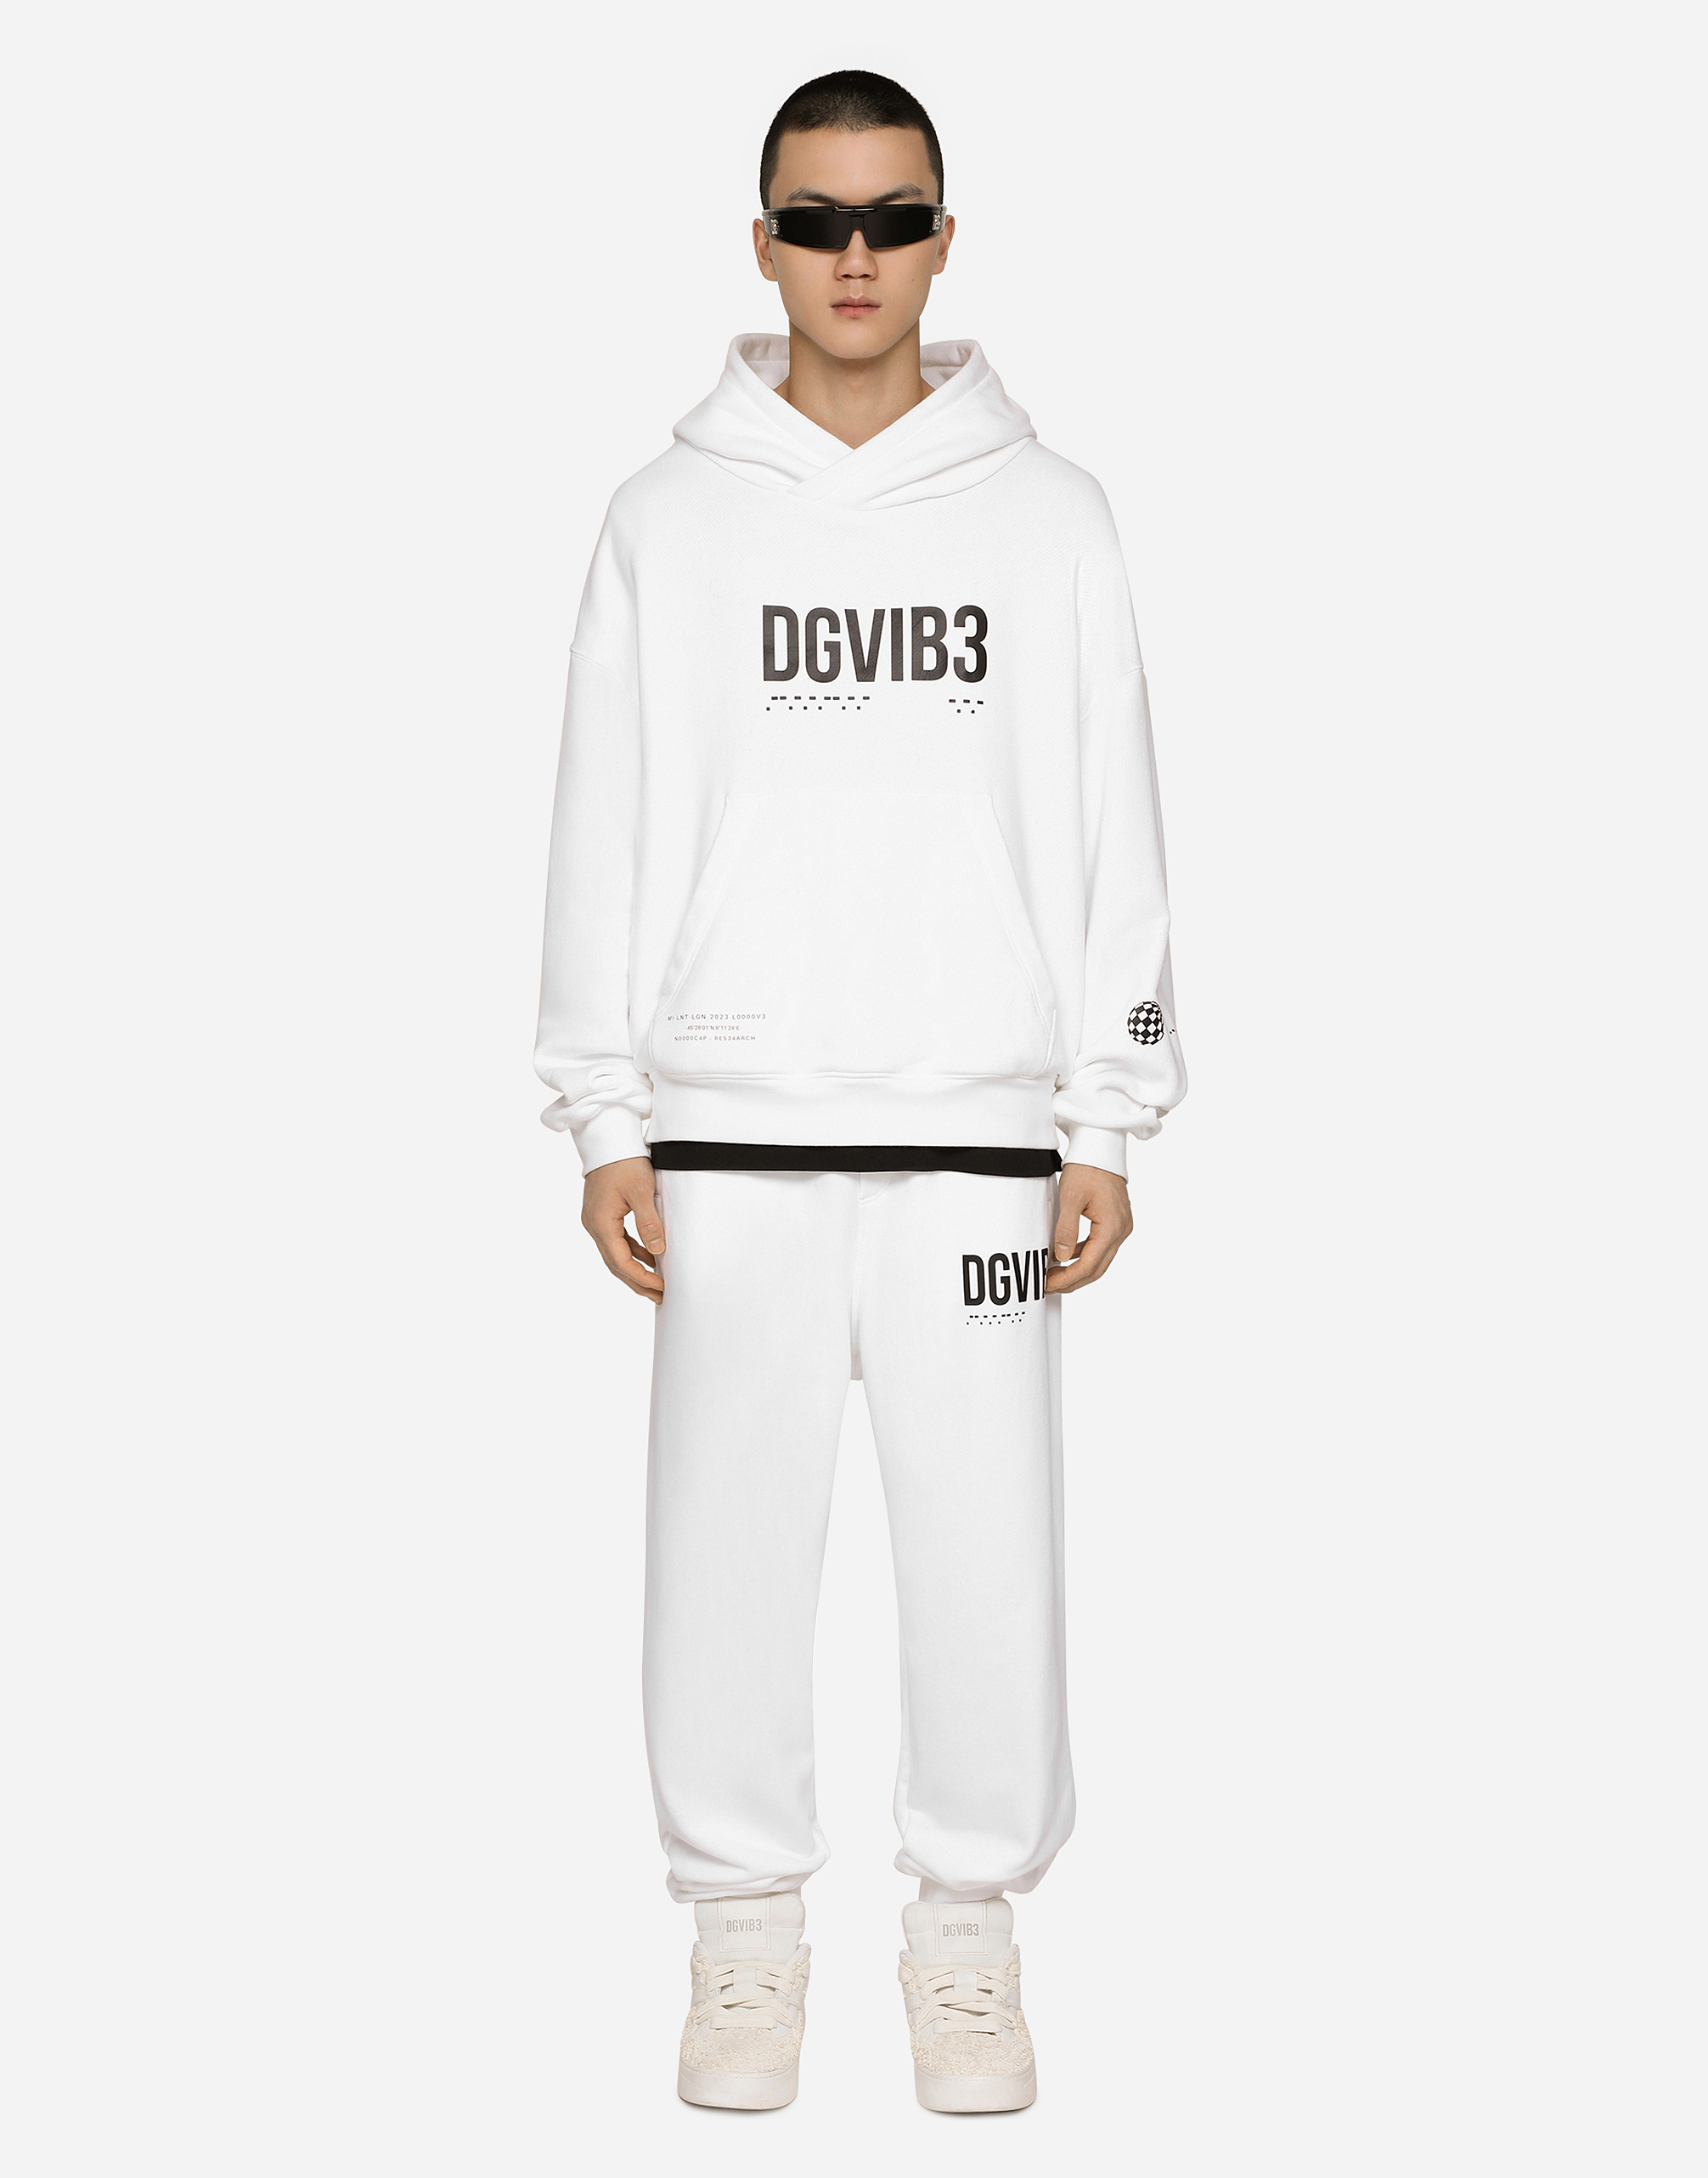 Dolce & Gabbana Jersey Hoodie With Dg Vib3 Print In White